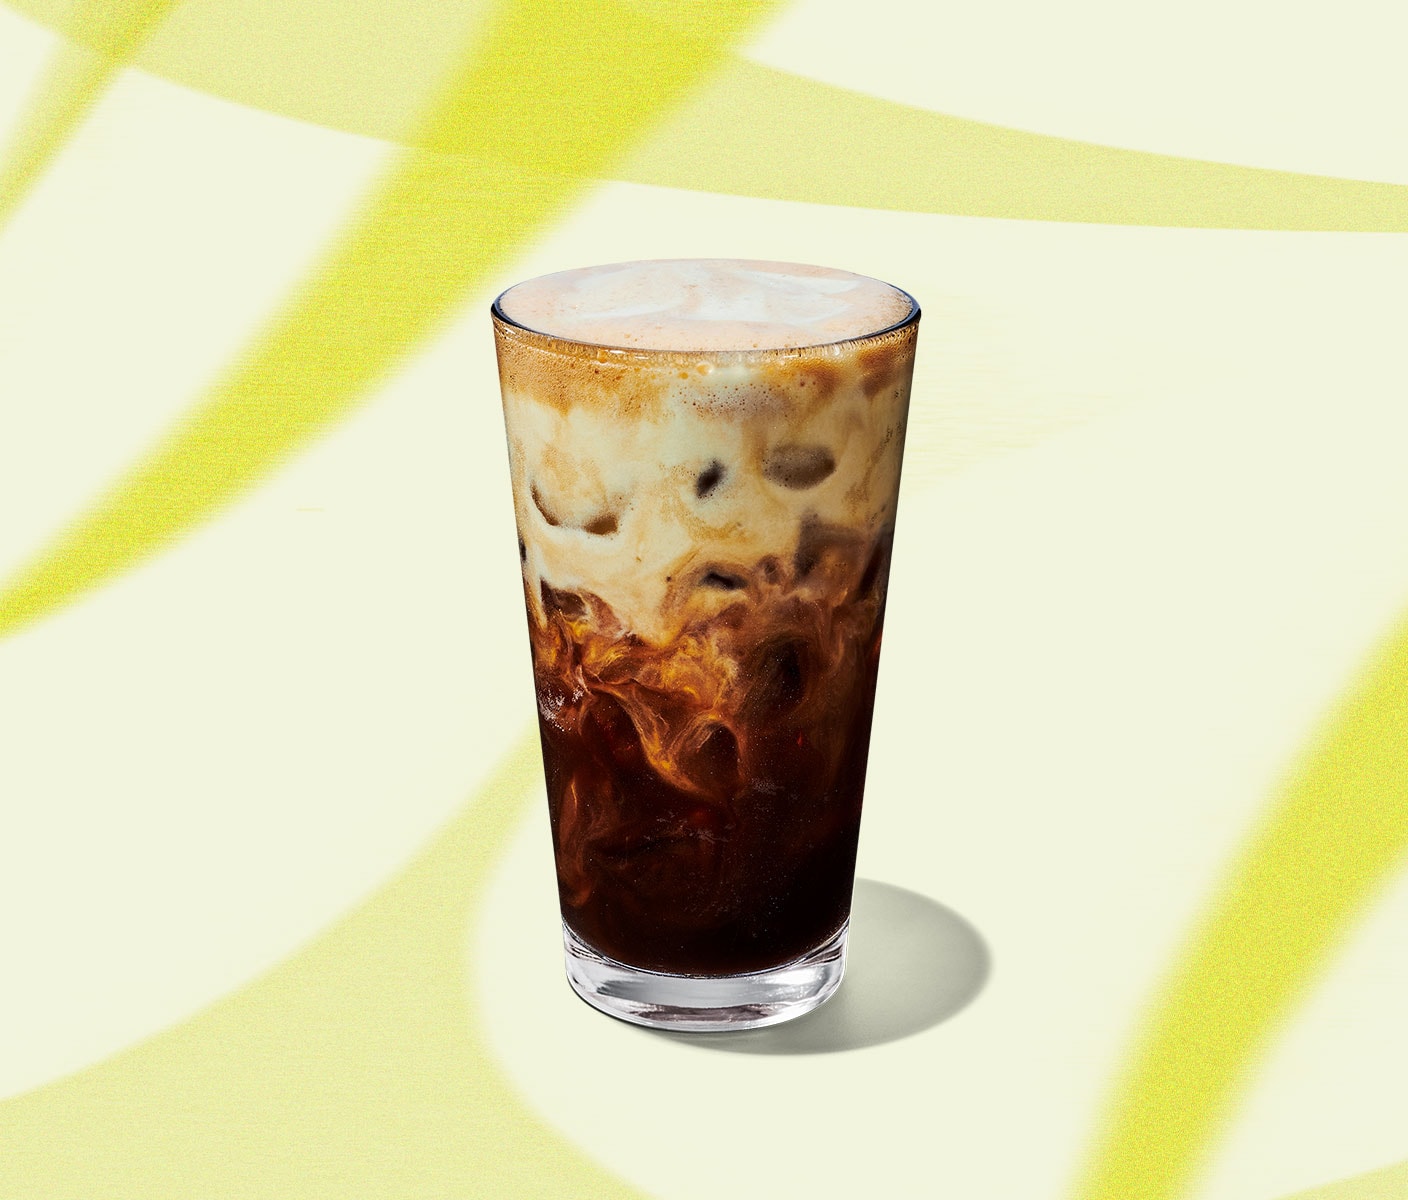 An iced coffee drink in a tall, clear glass with a creamy top half.